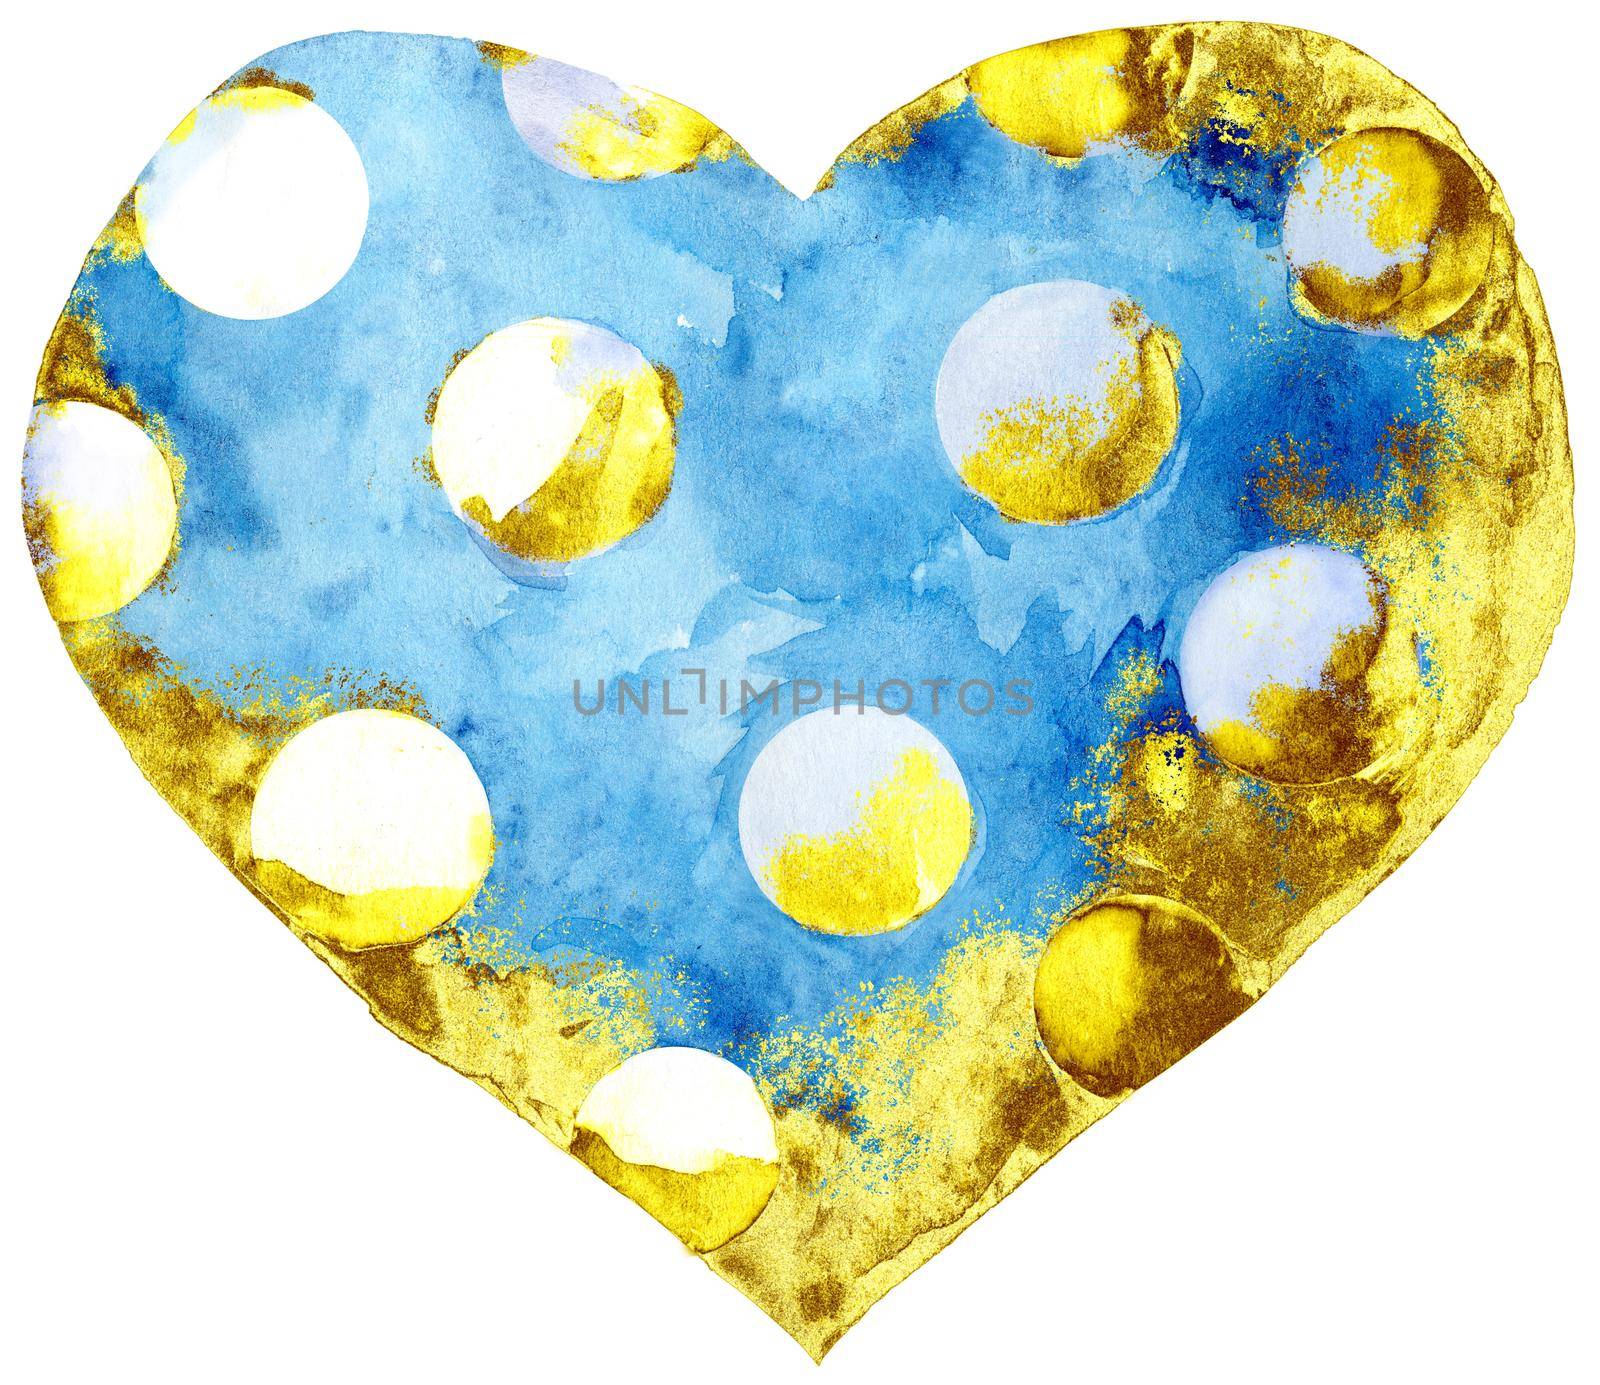 Watercolor blue heart with polka dots with gold strokes on a white background.